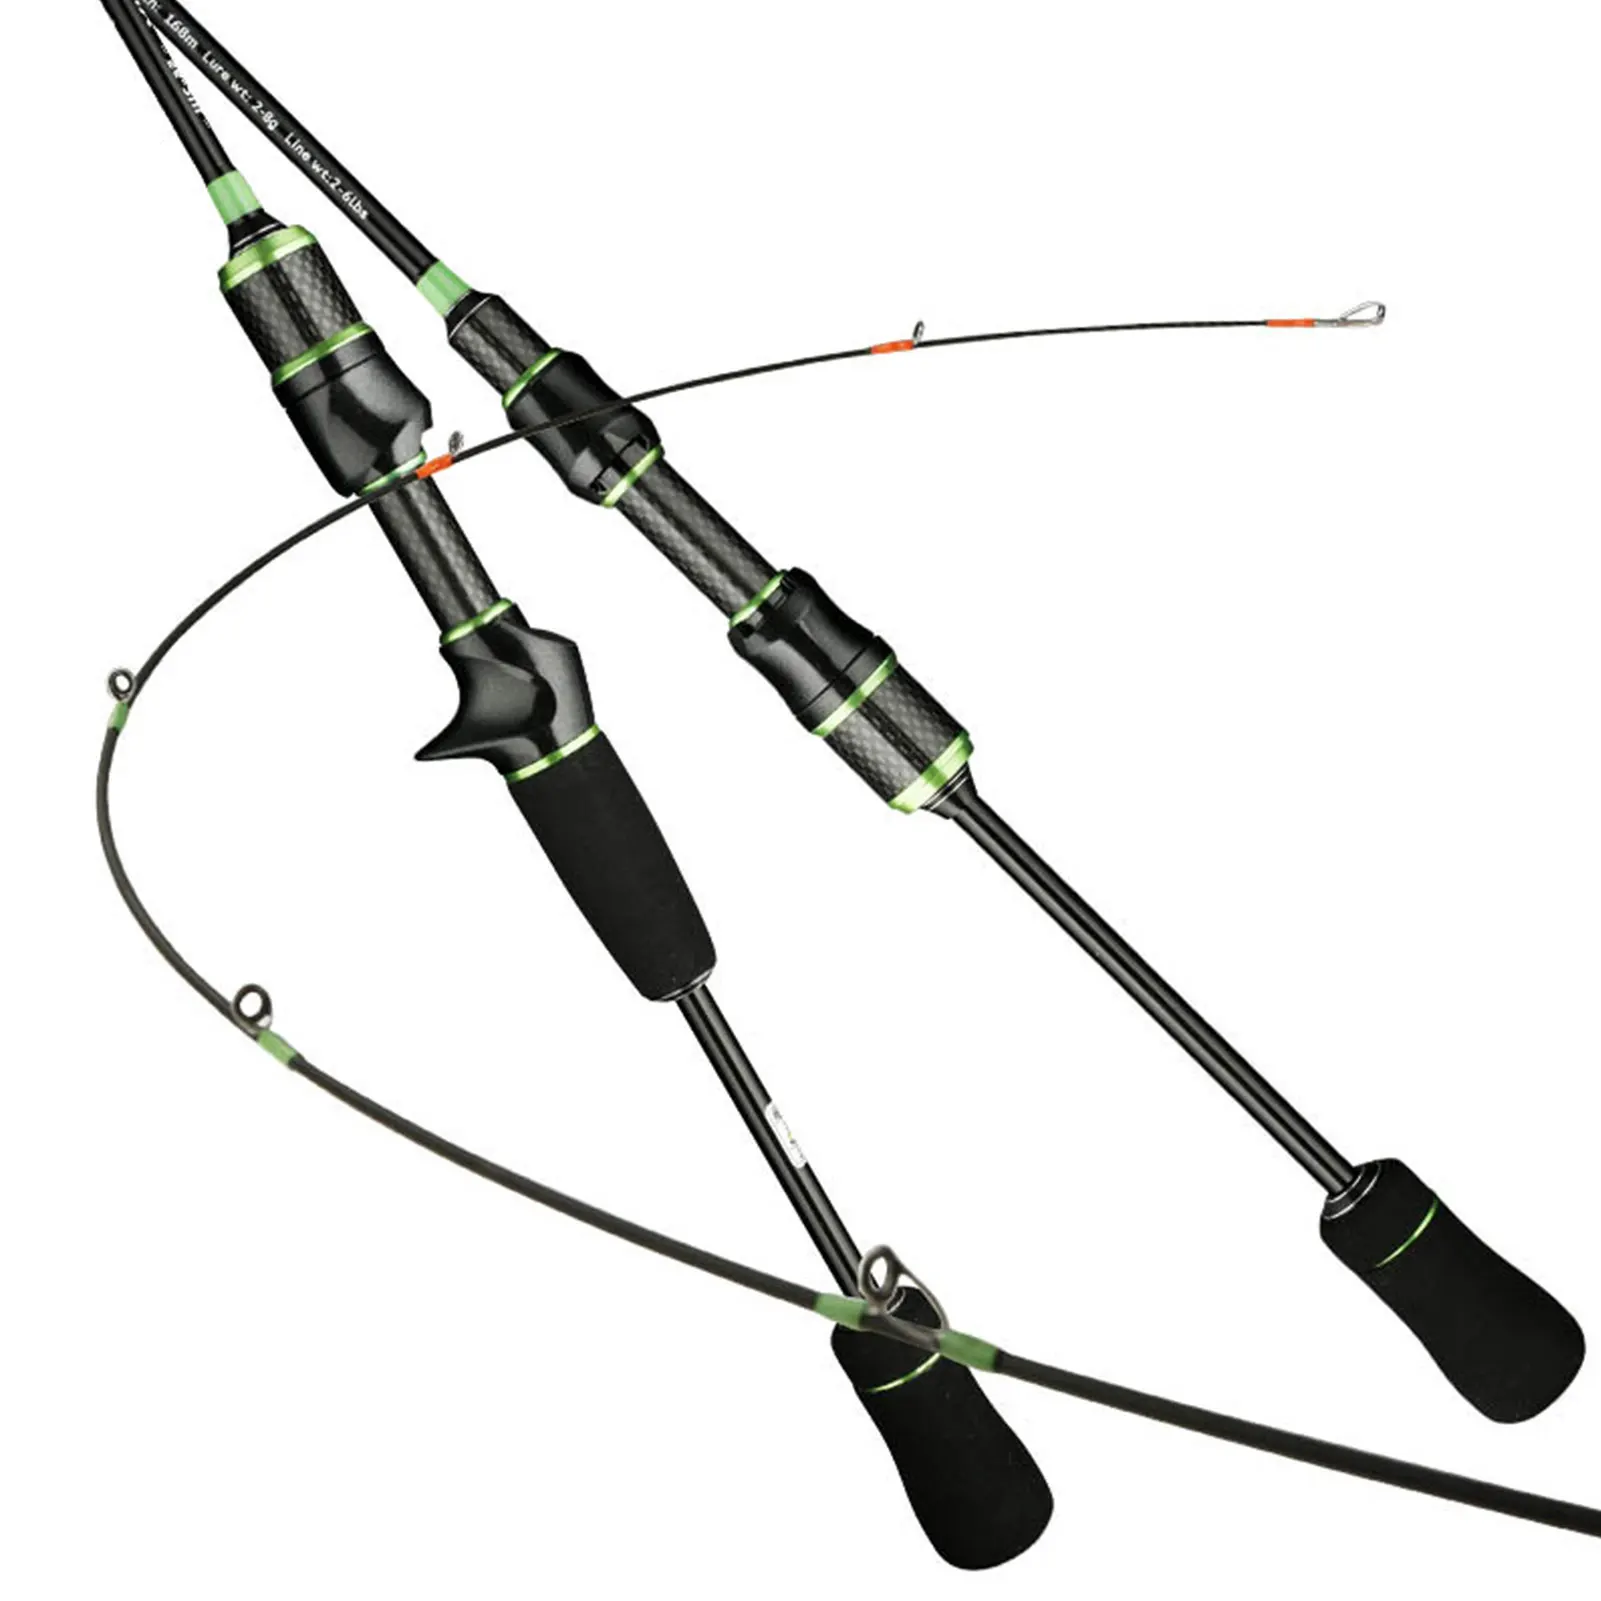 Enlarge Carbon Fishing Rods Lightweight Fishing Equipment Sea Pole Sea Fishing Tool Fishing Lures Accessories Saltwater Freshwater 낚시대